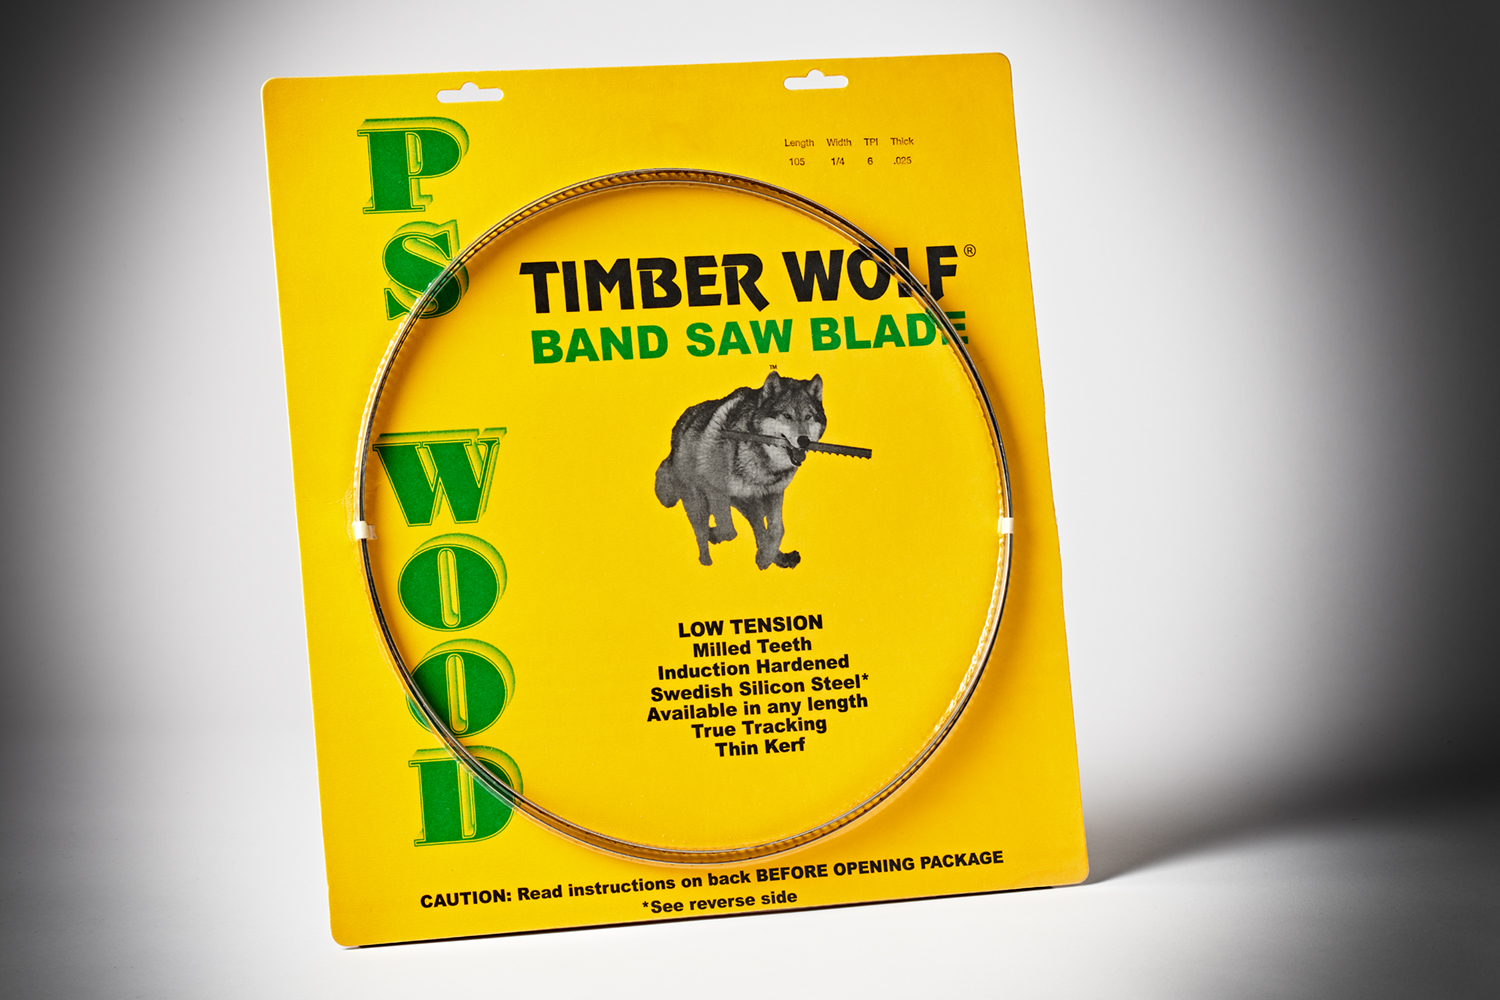 6 TPI Timber Wolf Bandsaw Blade 1/4 x 105 